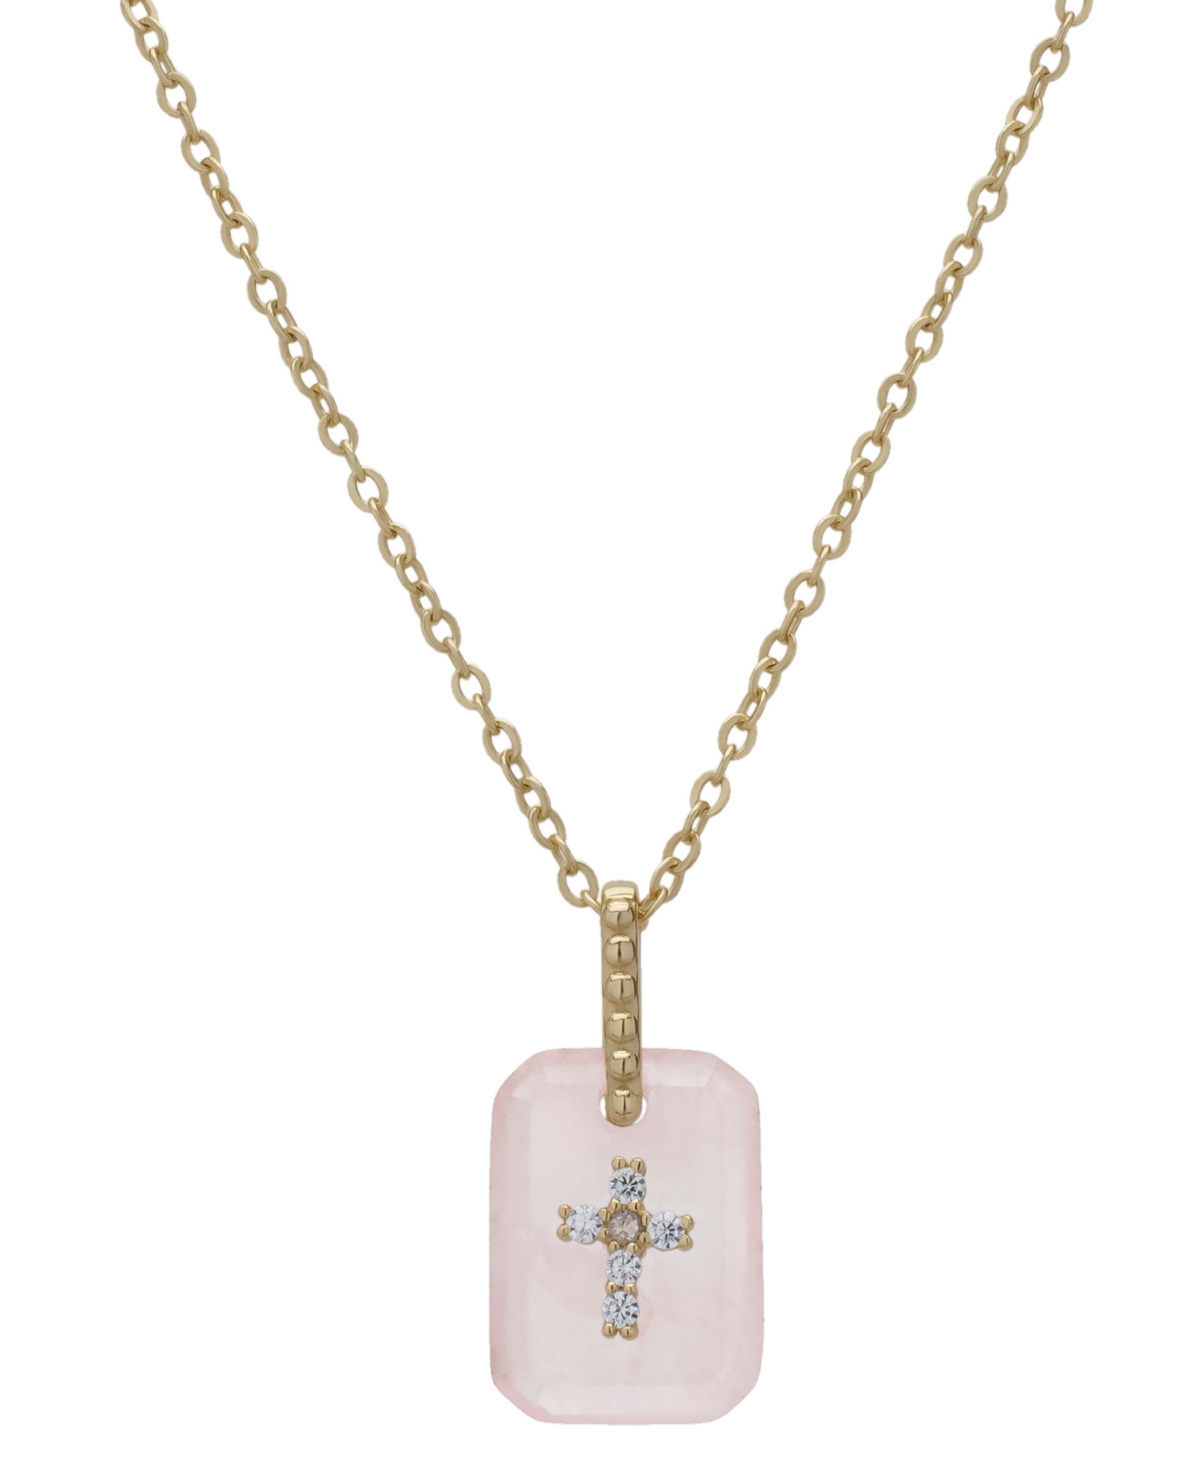 Rose Quartz (1-1/5 ct. t.w.) & Lab Grown White Sapphire (1/20 ct. t.w.) Cross Dog Tag Pendant Necklace in 14k Gold-Plated Sterling Silver, 16" + 2" ex